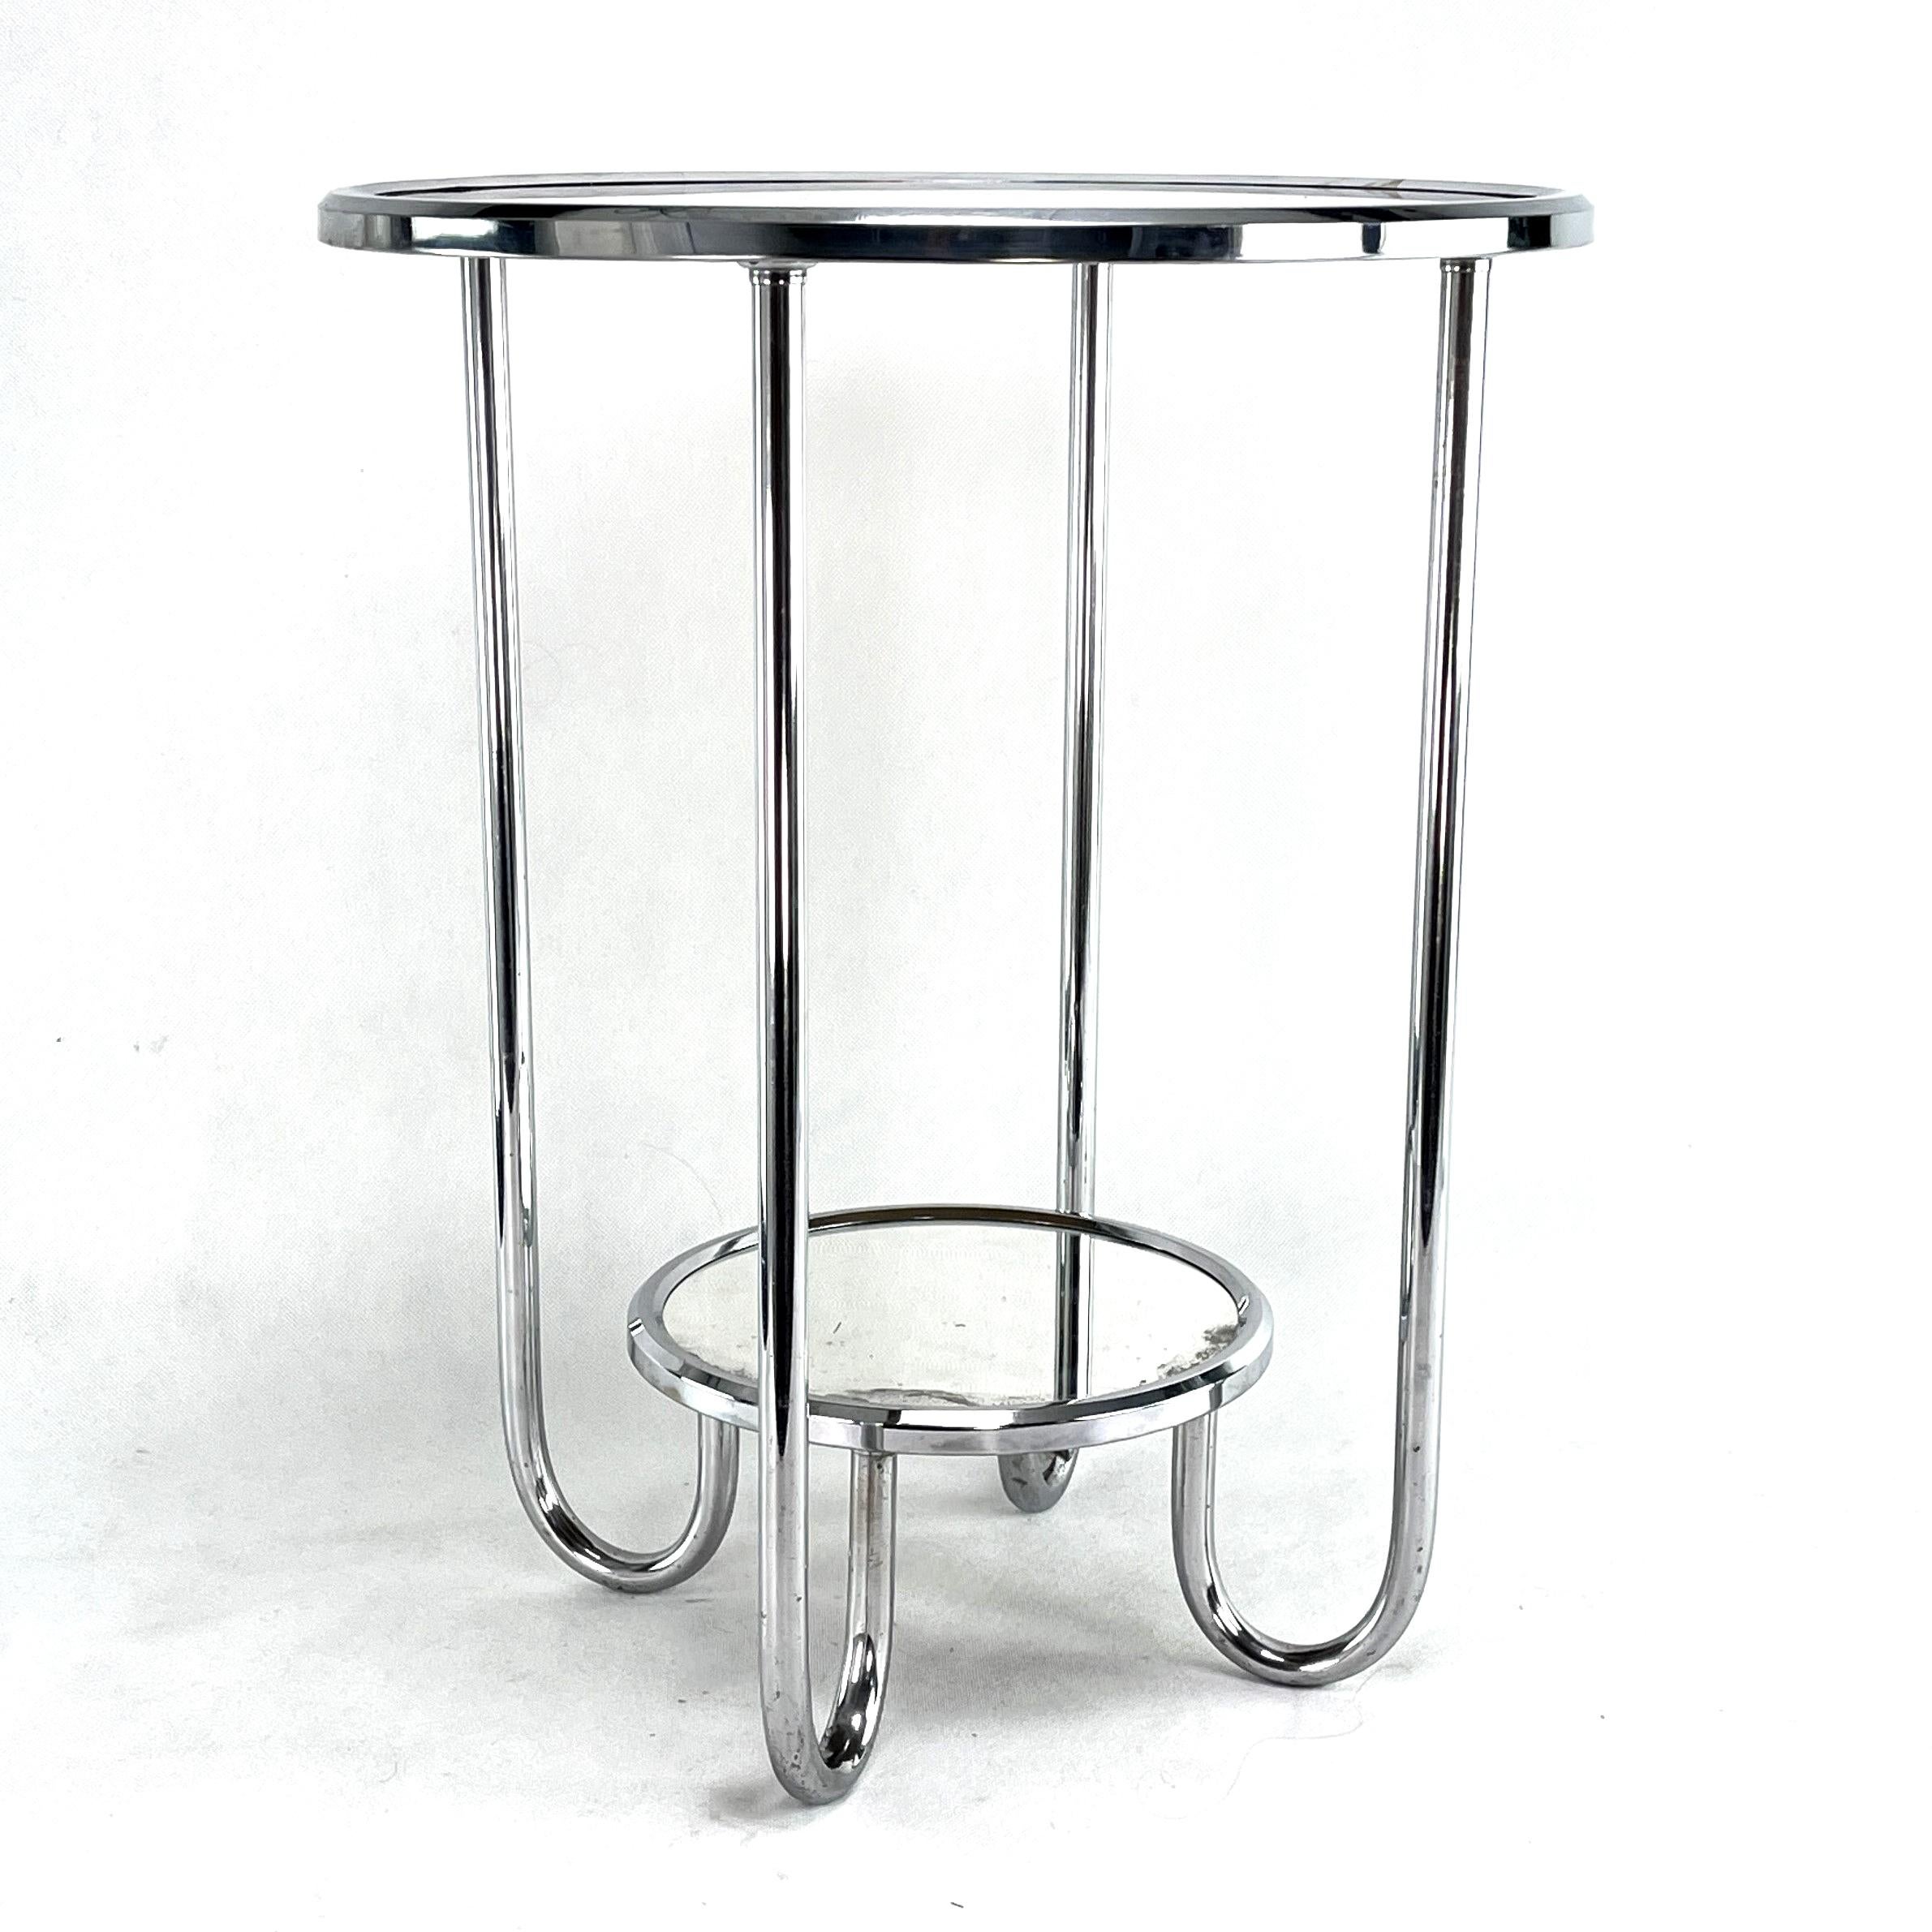 Bauhaus side table - 1930s.

This beautiful side table has two levels and is from the 1930s. The table is in the Streamline Modern style. This style emphasised curvy streamlined shapes. The loop table still captivates with its beautiful straight